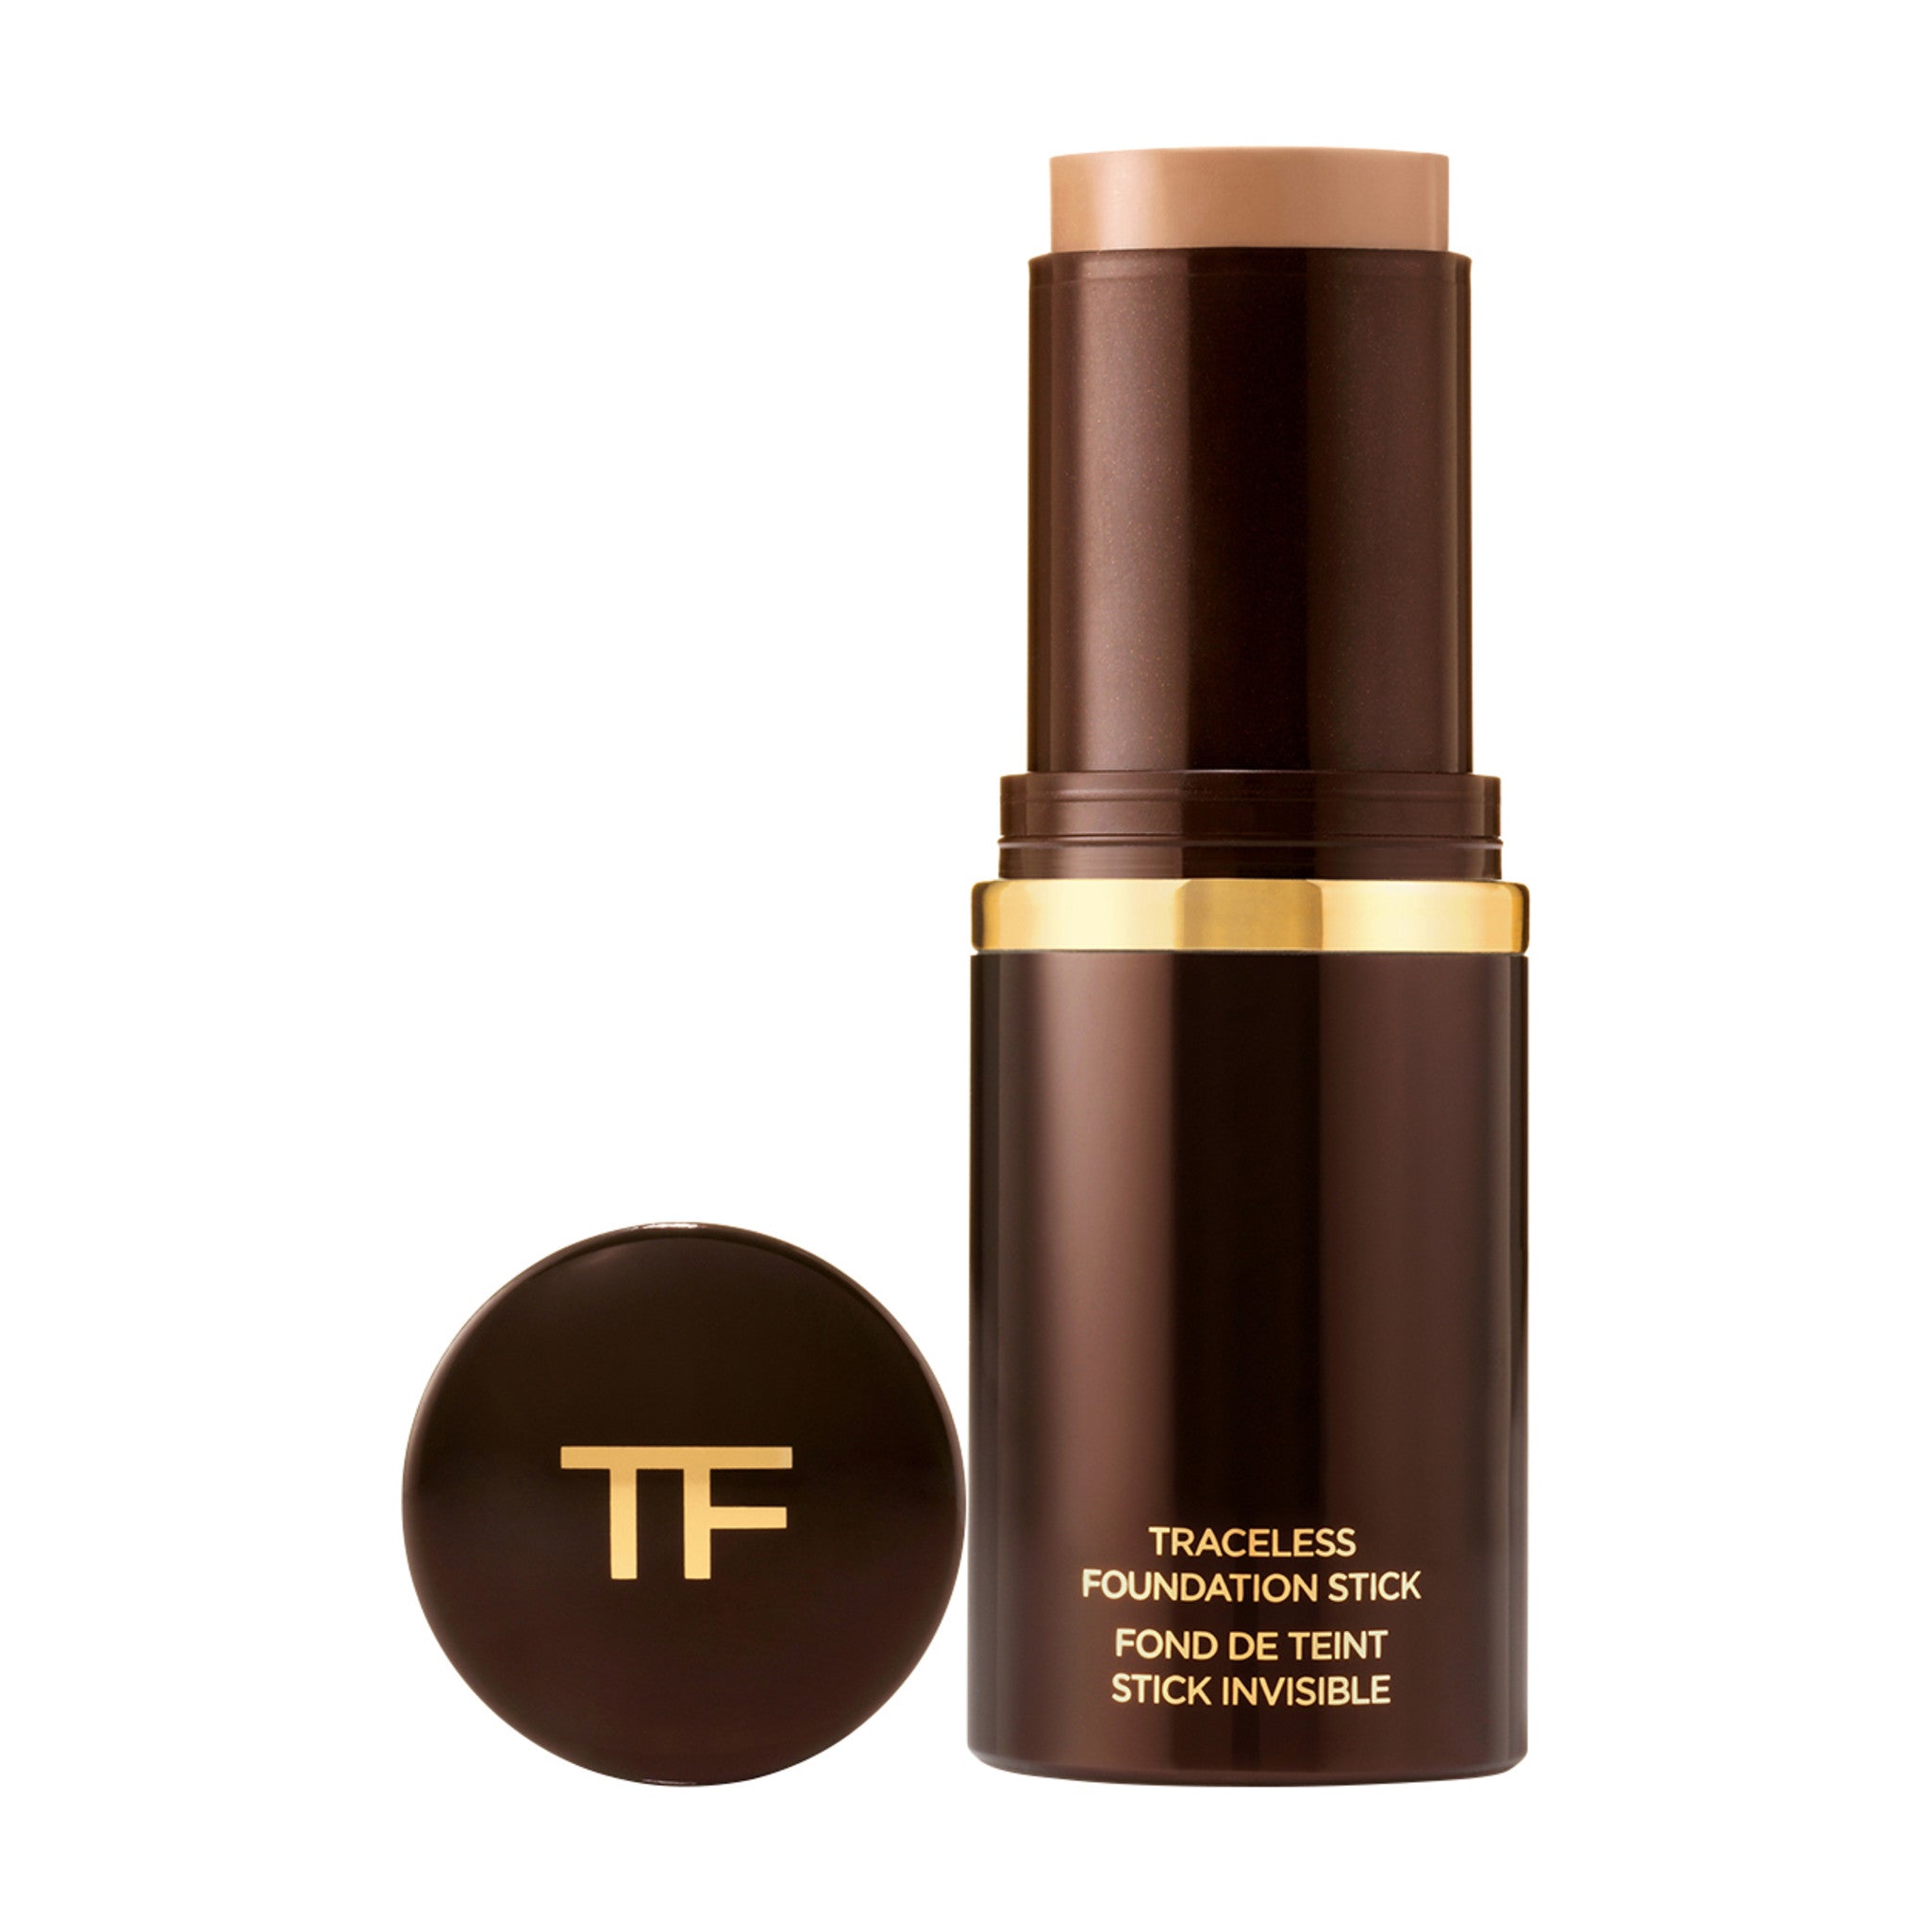 Tom Ford Traceless Foundation Stick Color/Shade variant: 8.2 Warm Honey (Dark, warm red undertone) main image. This product is for deep warm red complexions